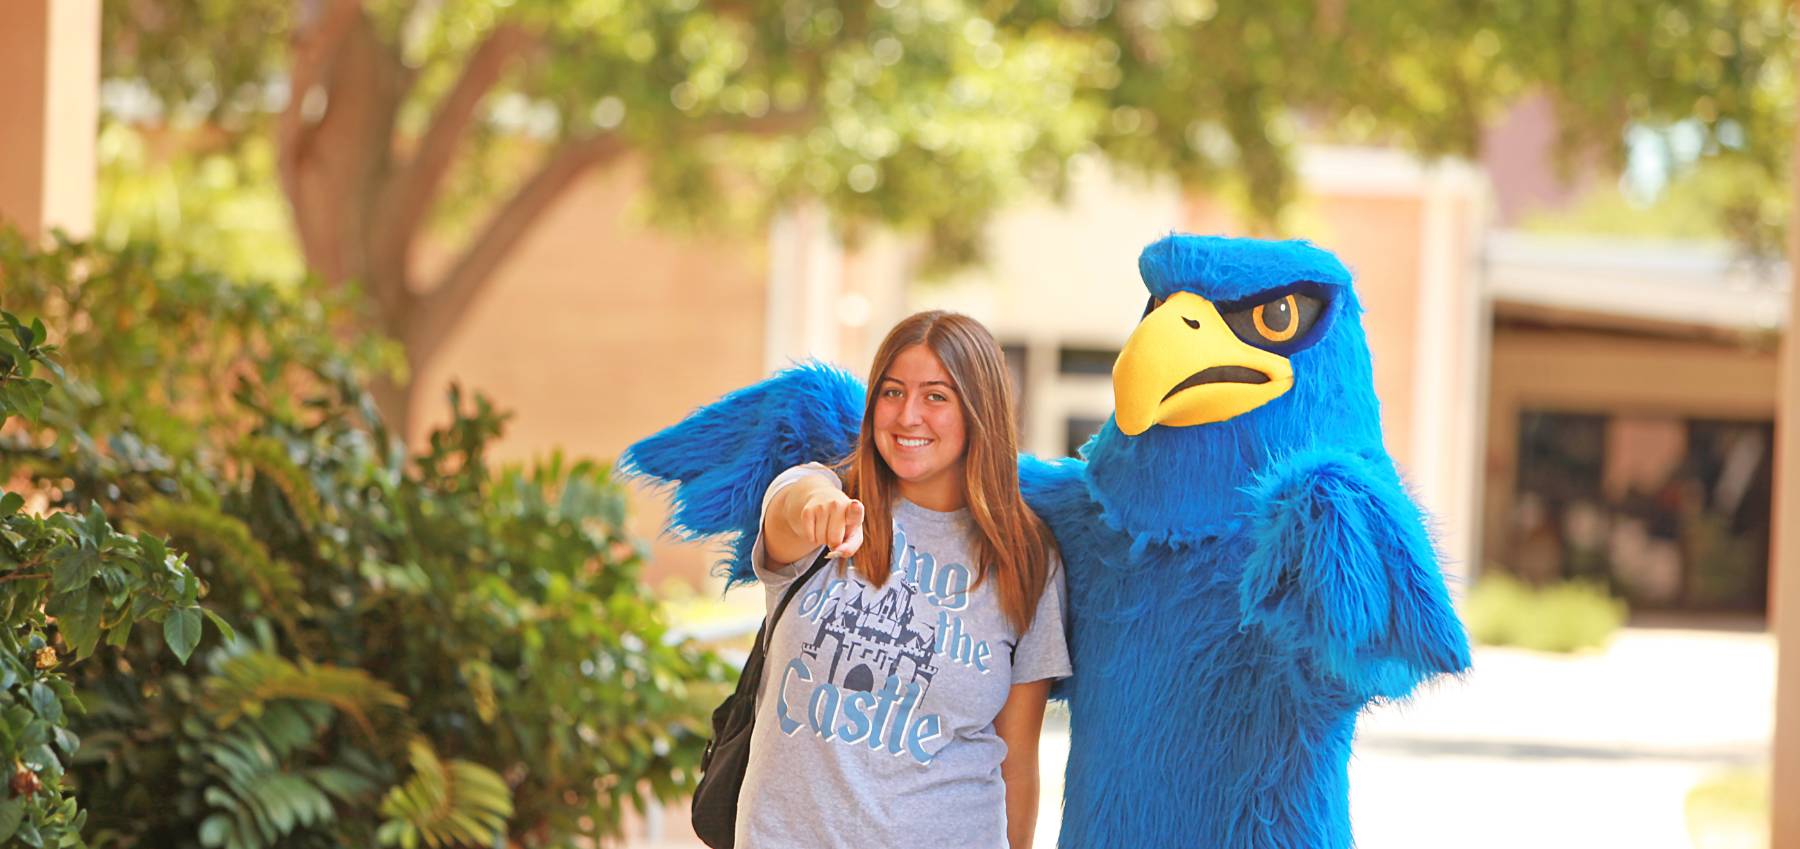 student walking with Freddie Falcon outside pointing